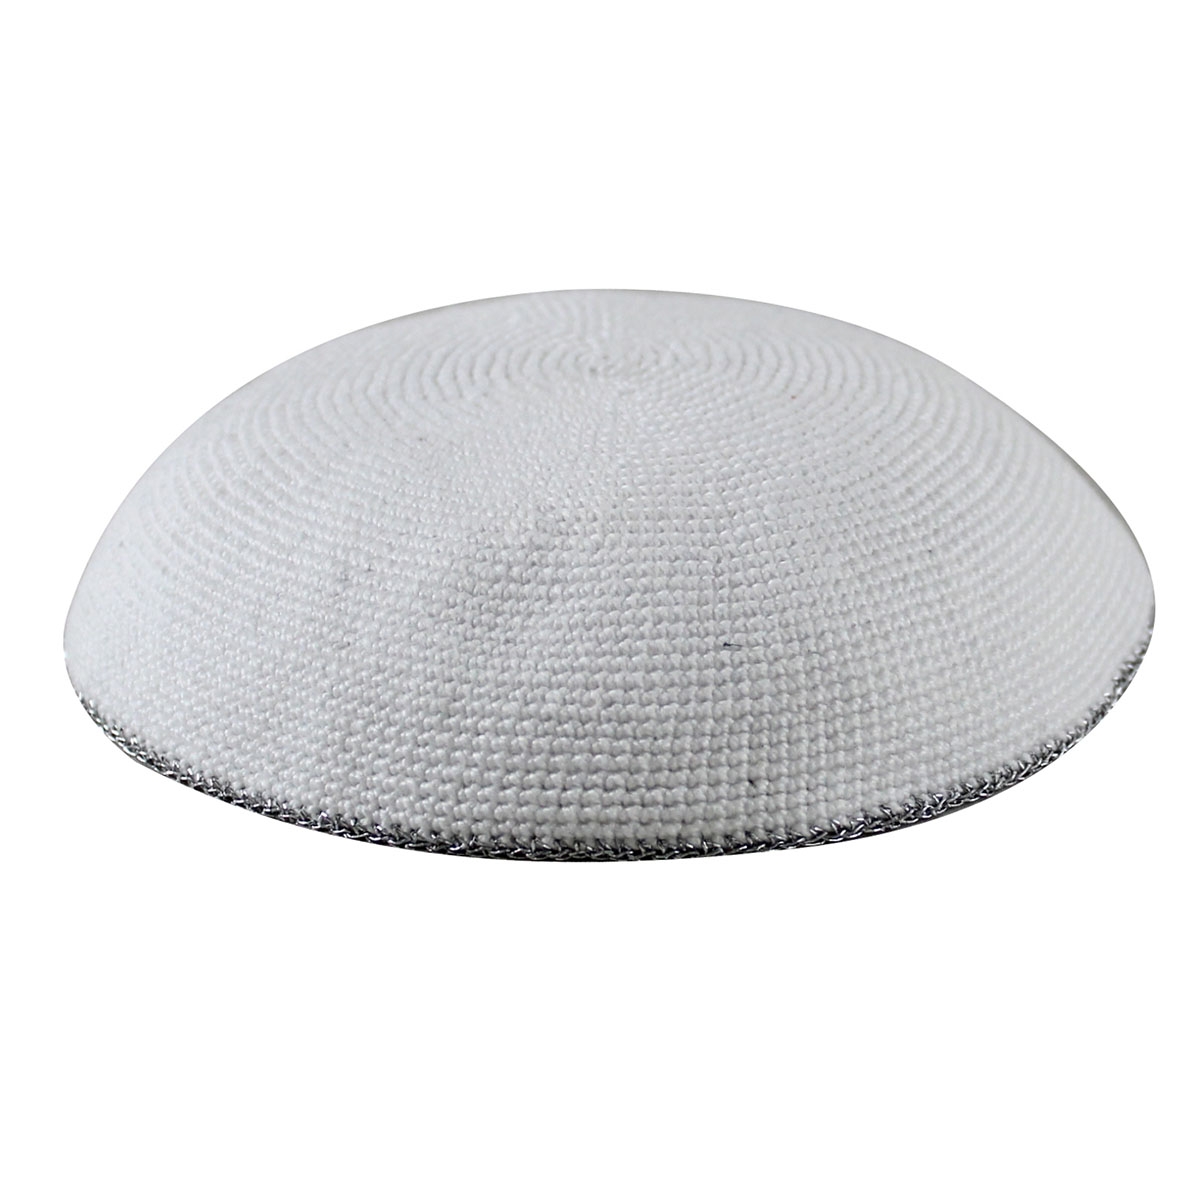 White Hand-Made Knit Kippah with Silver Trim - 1